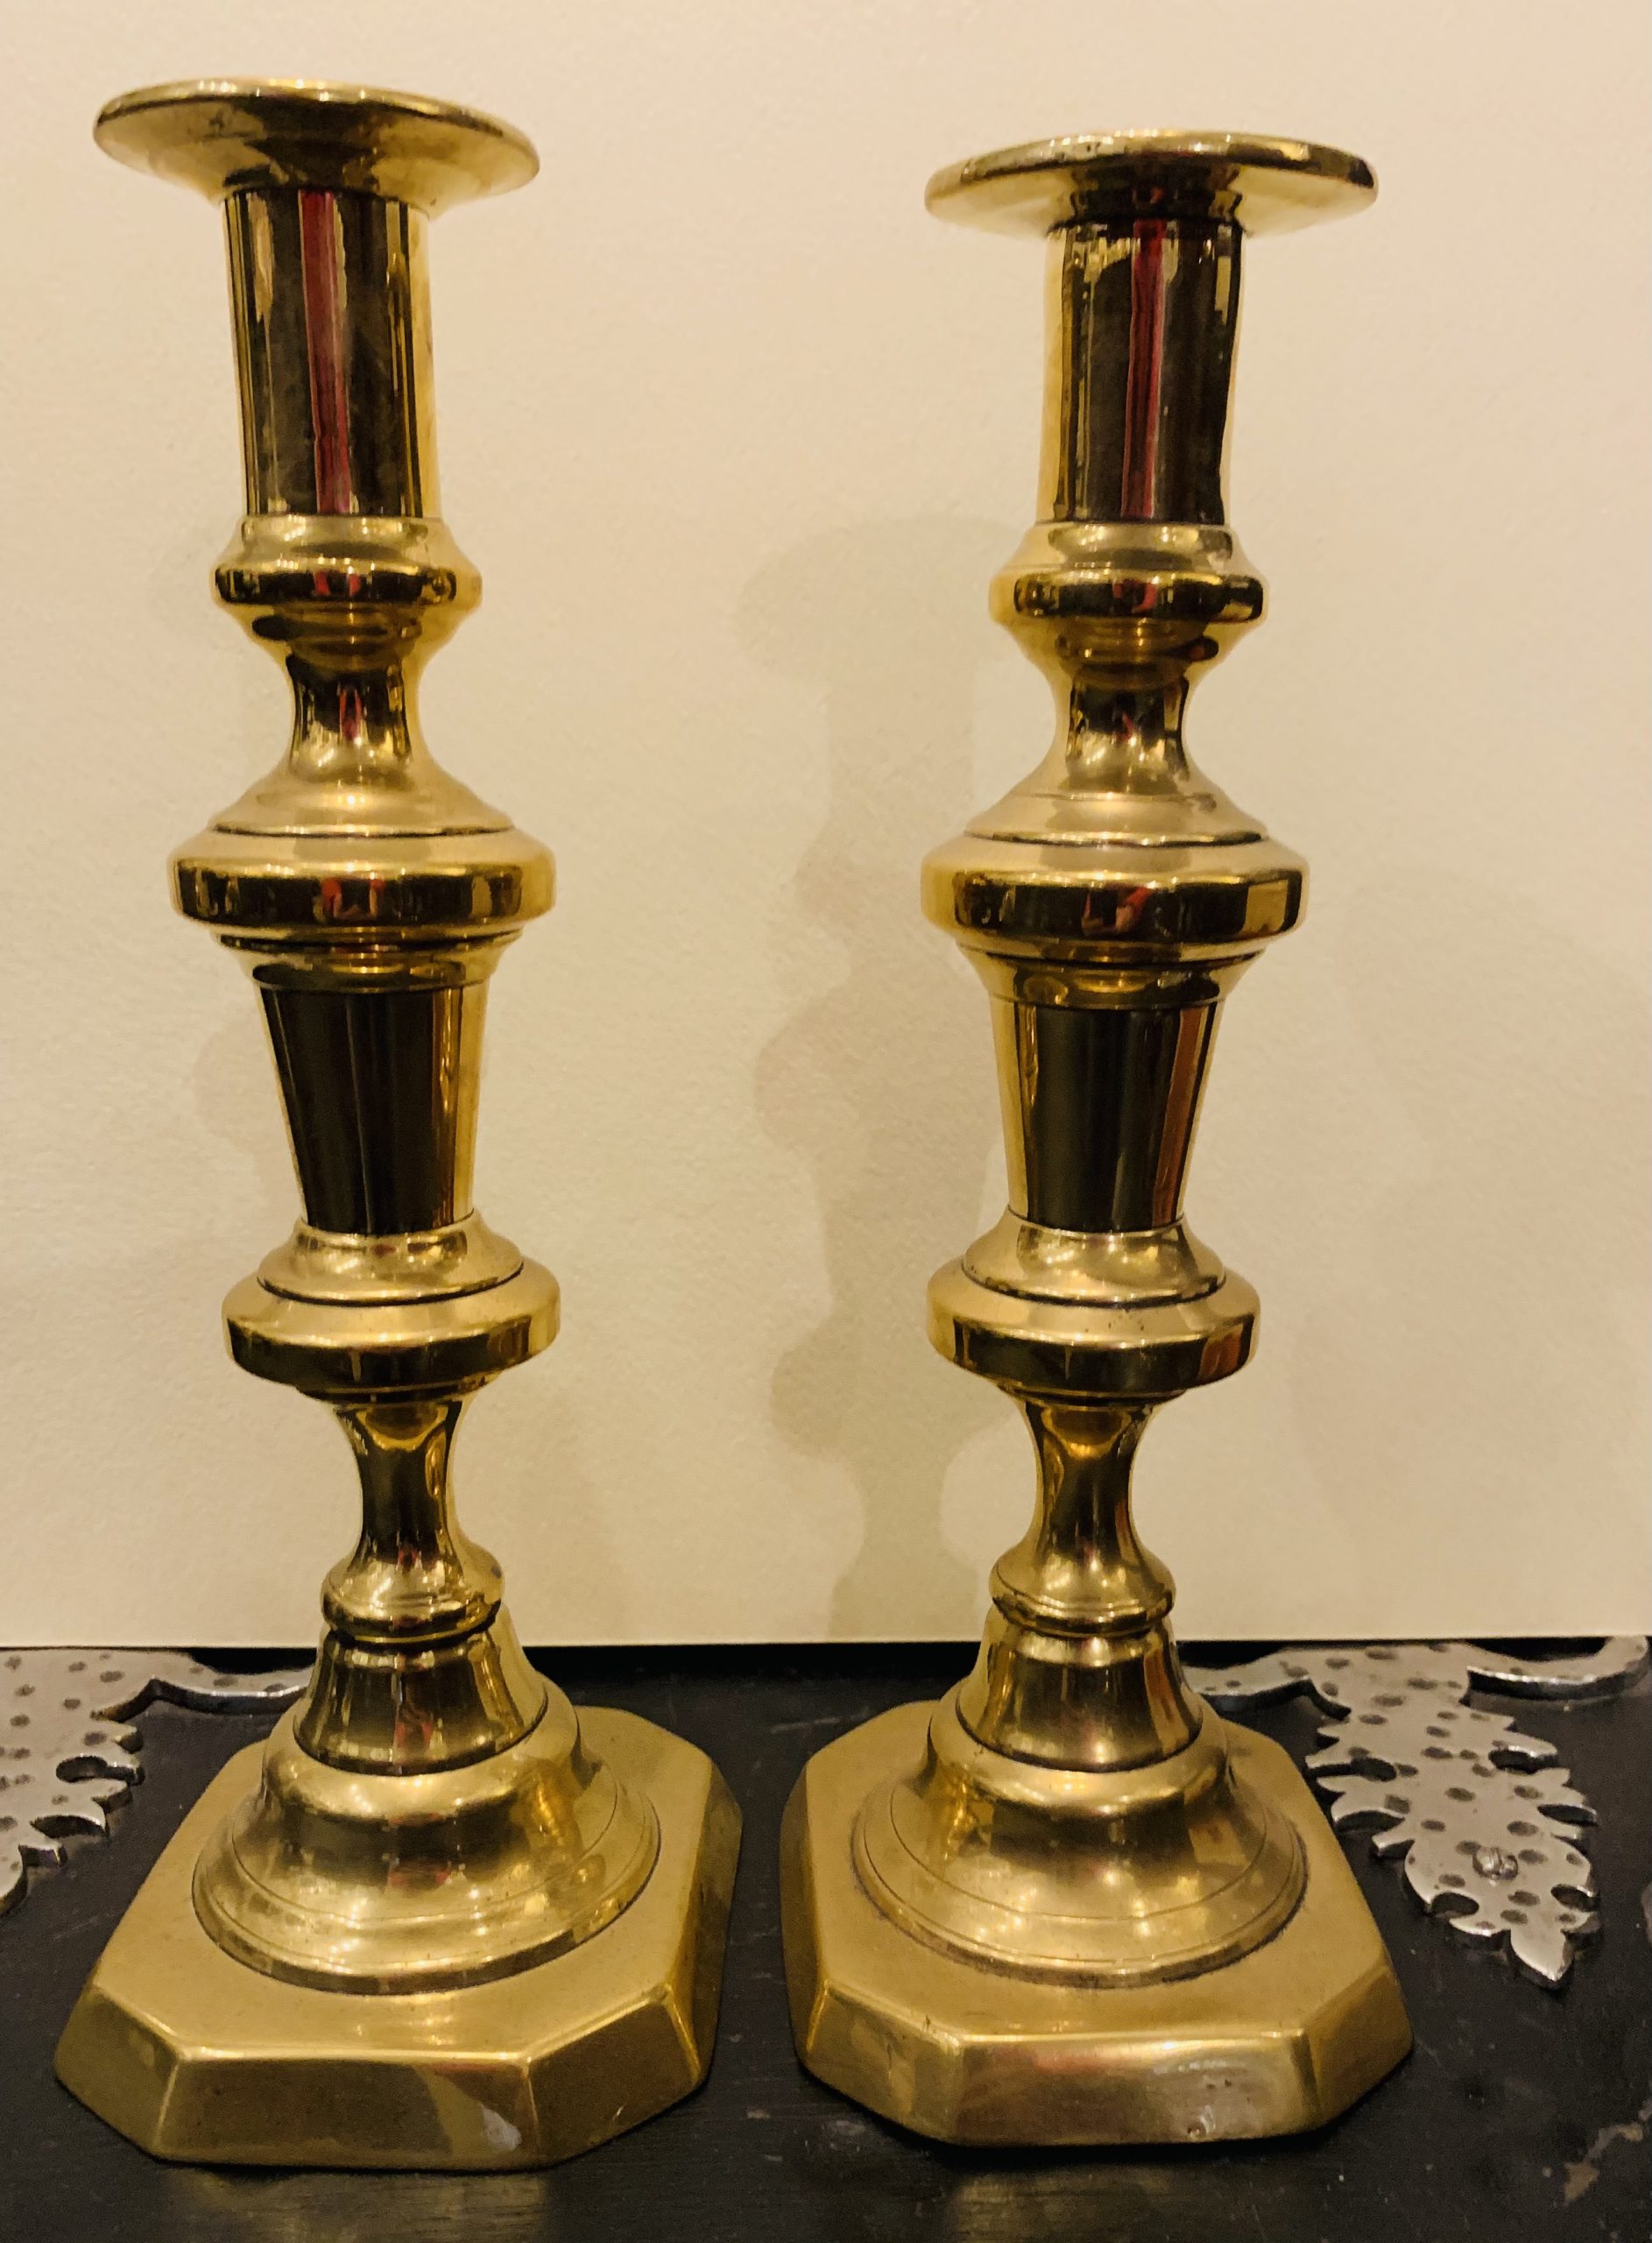 Do brass old candlesticks with what to IDENTIFICATION GUIDES